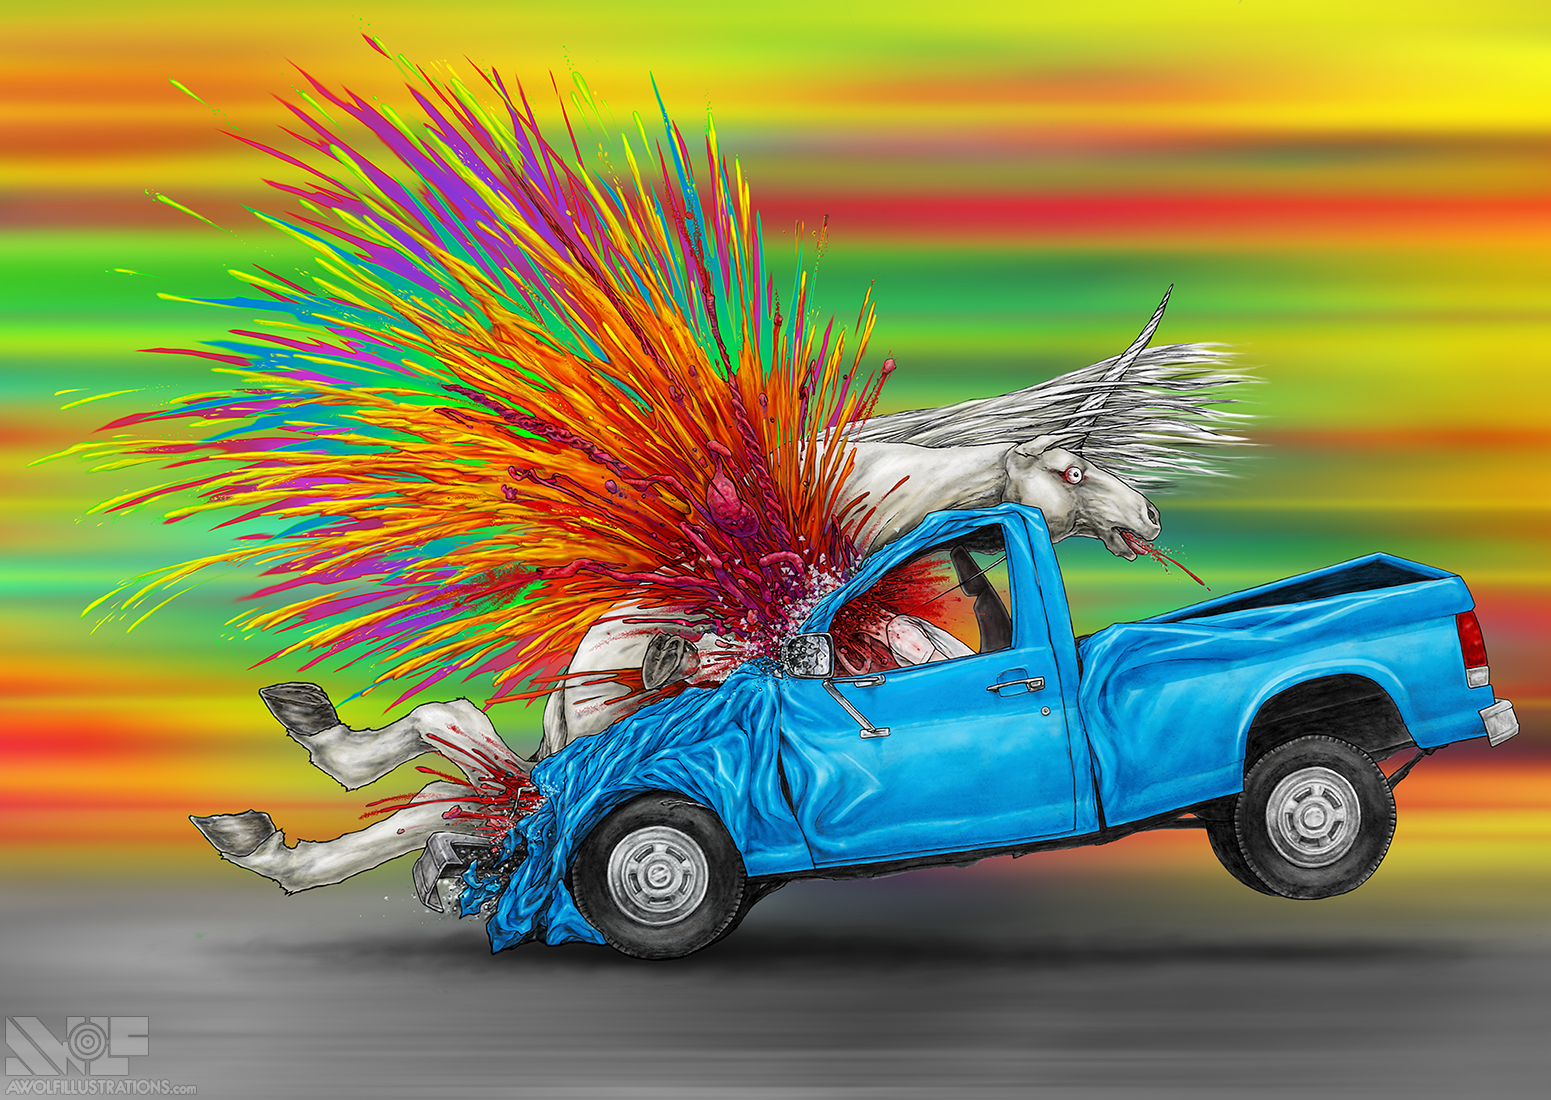 An artwork by aaron Wolf for Pandemic Puzzles illustrates the vibrant rainbow explosion of a unicorn being hit by a pickup truck